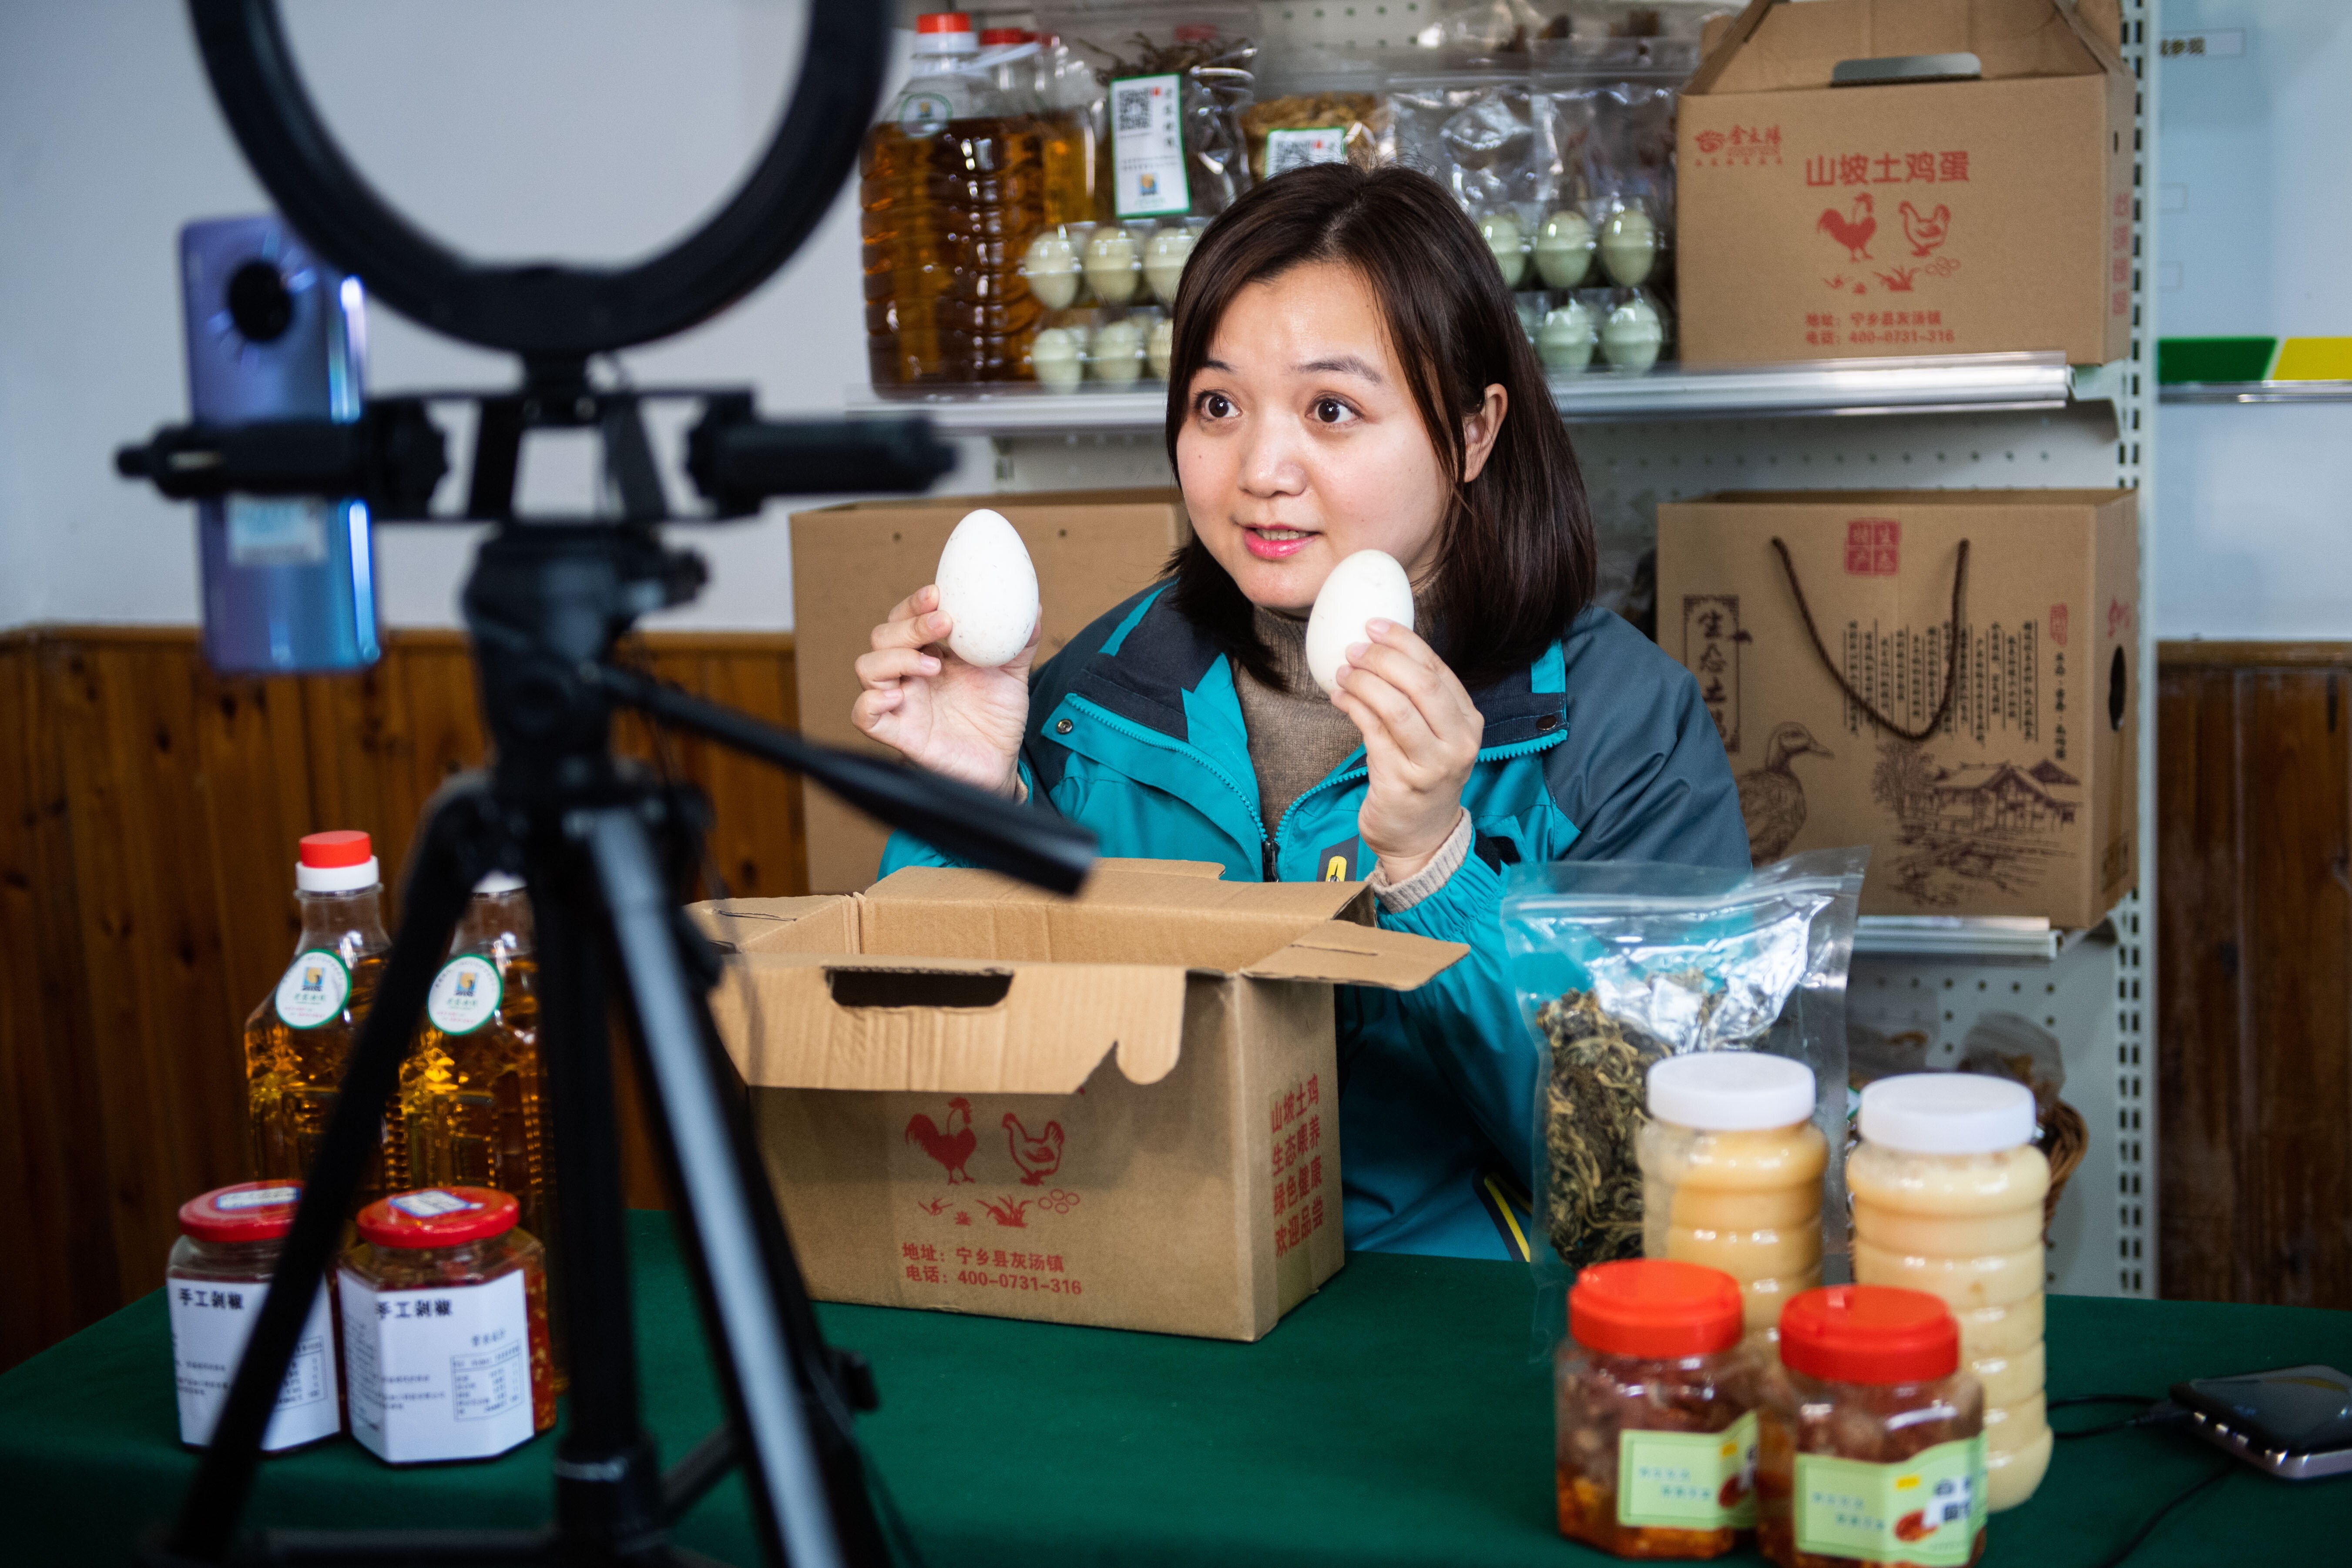 Zhang Qin, an overseas returnee, introduces eggs via live-streaming on an e-commerce platform she founded in Huitang Village of Huitang County, central China's Hunan Province, March 13, 2020. Photo: Xinhua